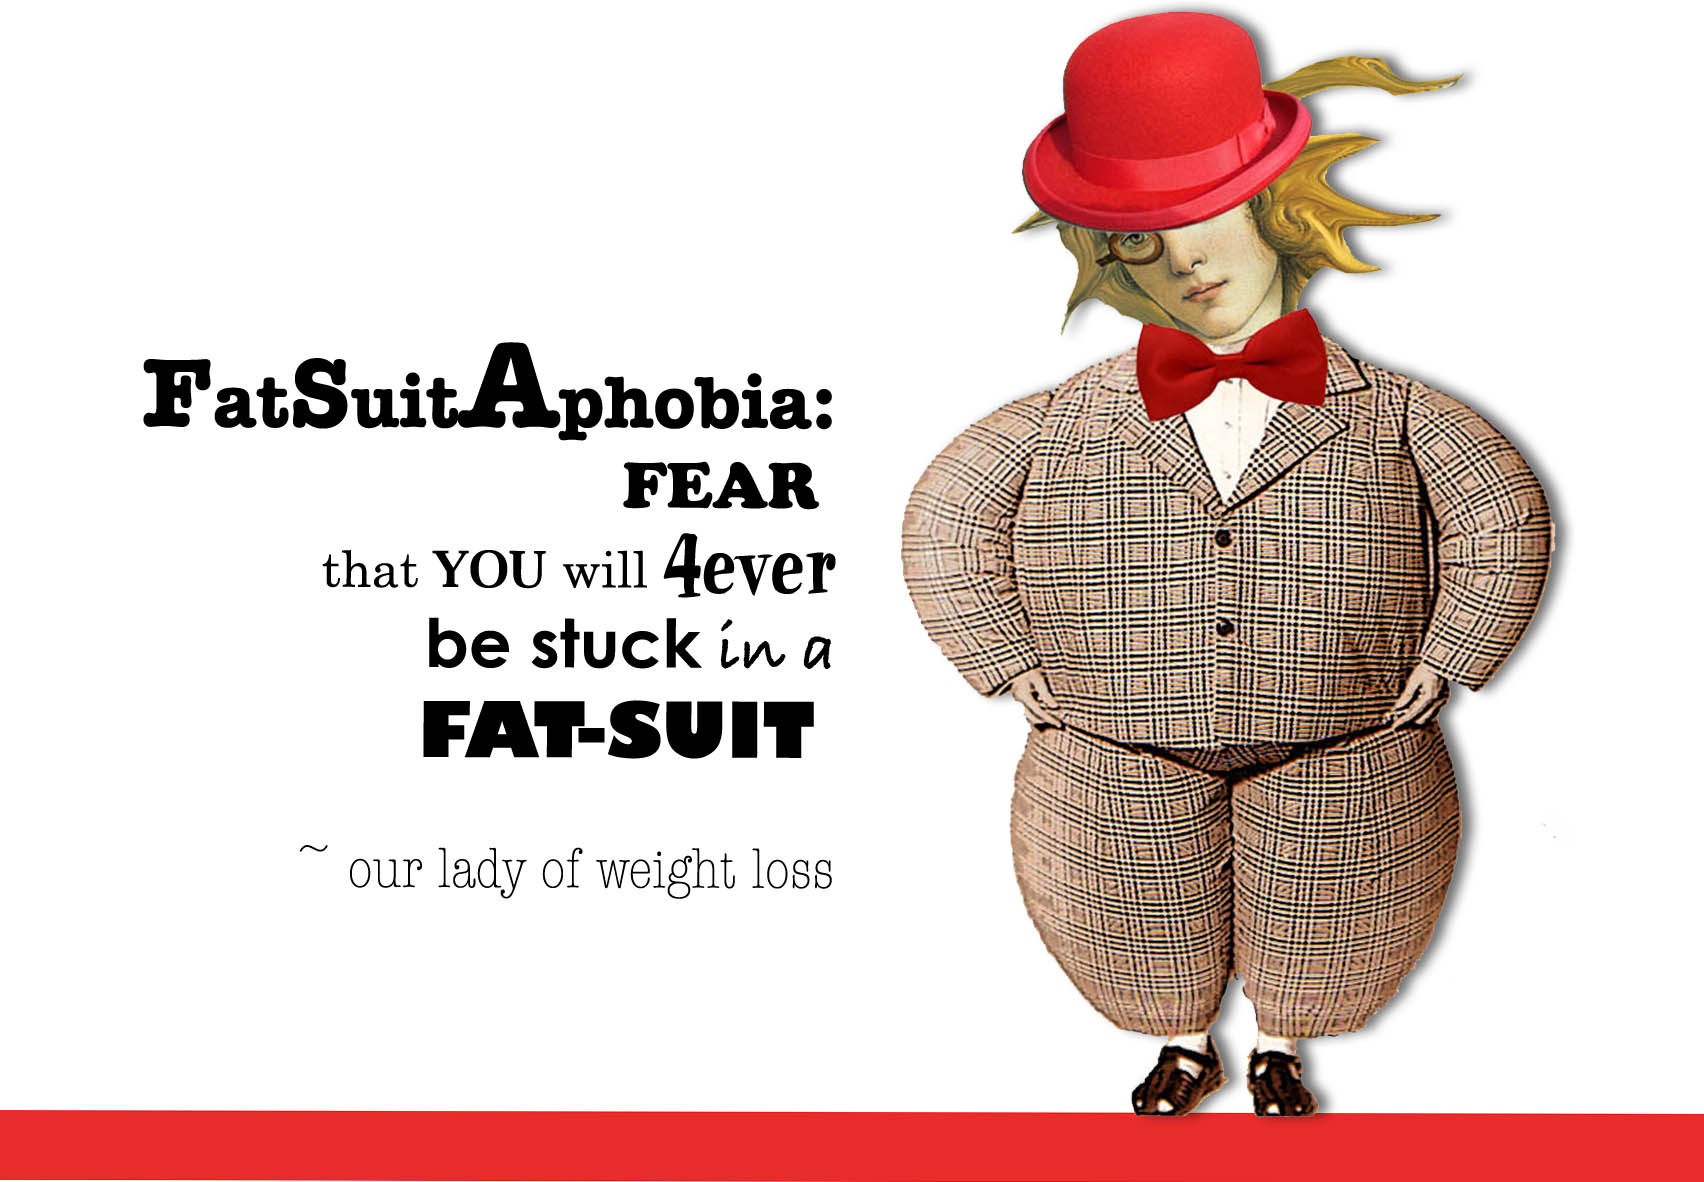 Our Lady of Weight Loss' Fat Suit